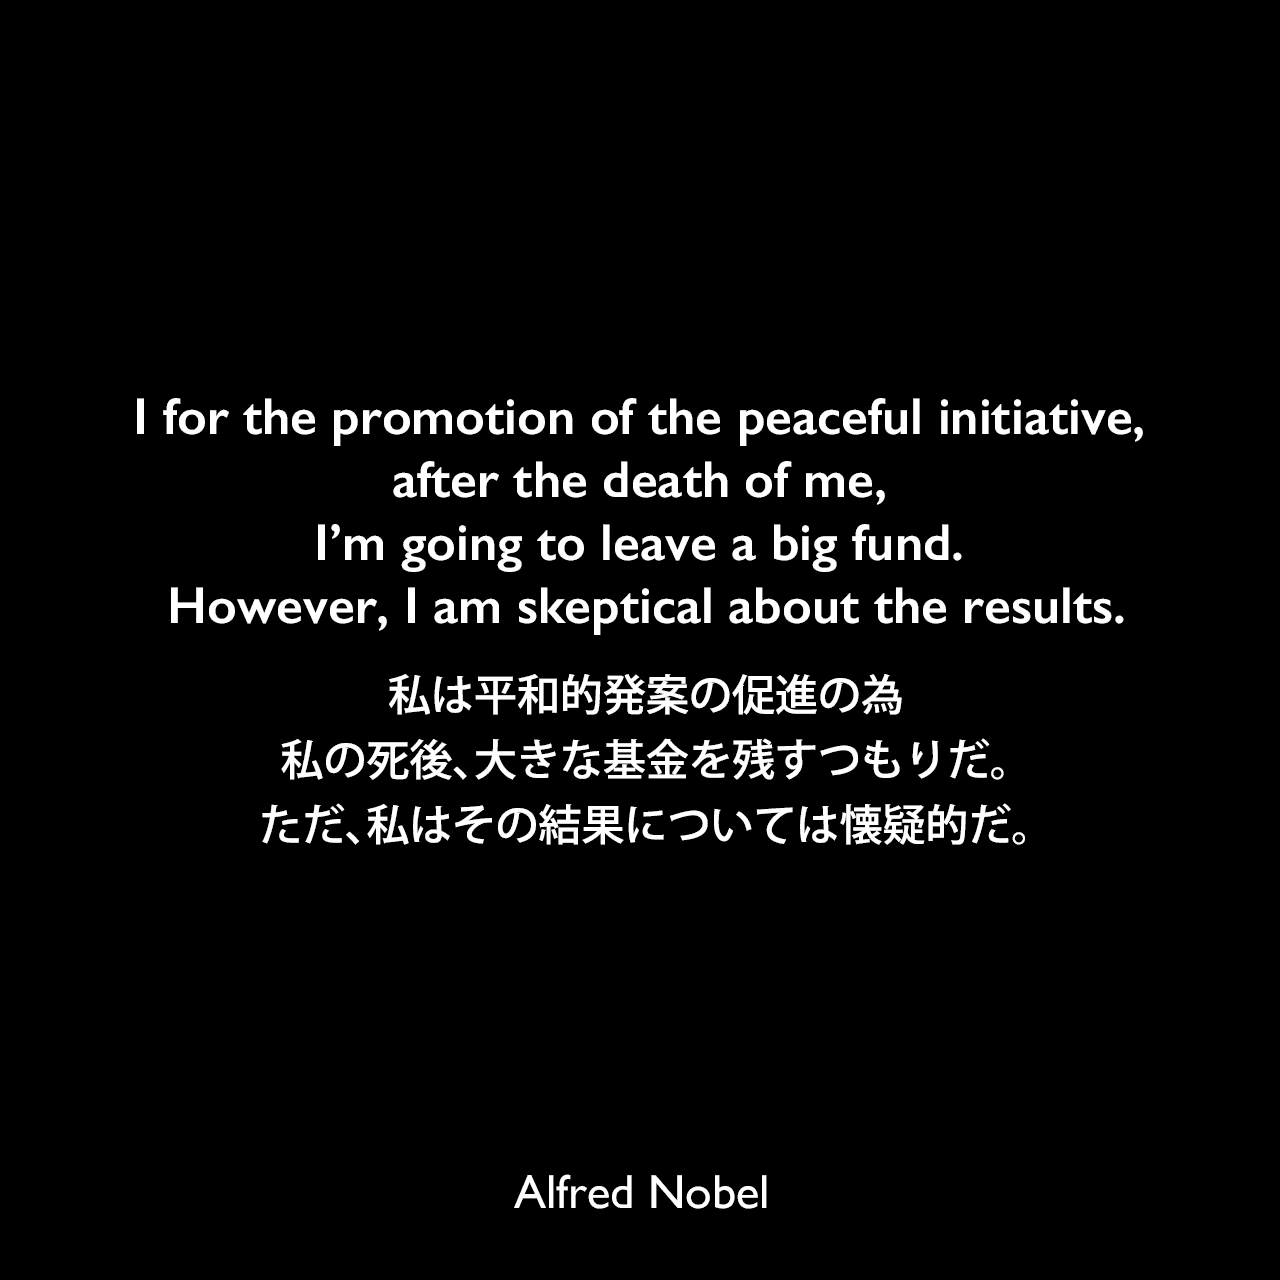 I for the promotion of the peaceful initiative, after the death of me, I’m going to leave a big fund. However, I am skeptical about the results.私は平和的発案の促進の為、私の死後、大きな基金を残すつもりだ。 ただ、私はその結果については懐疑的だ。Alfred Nobel